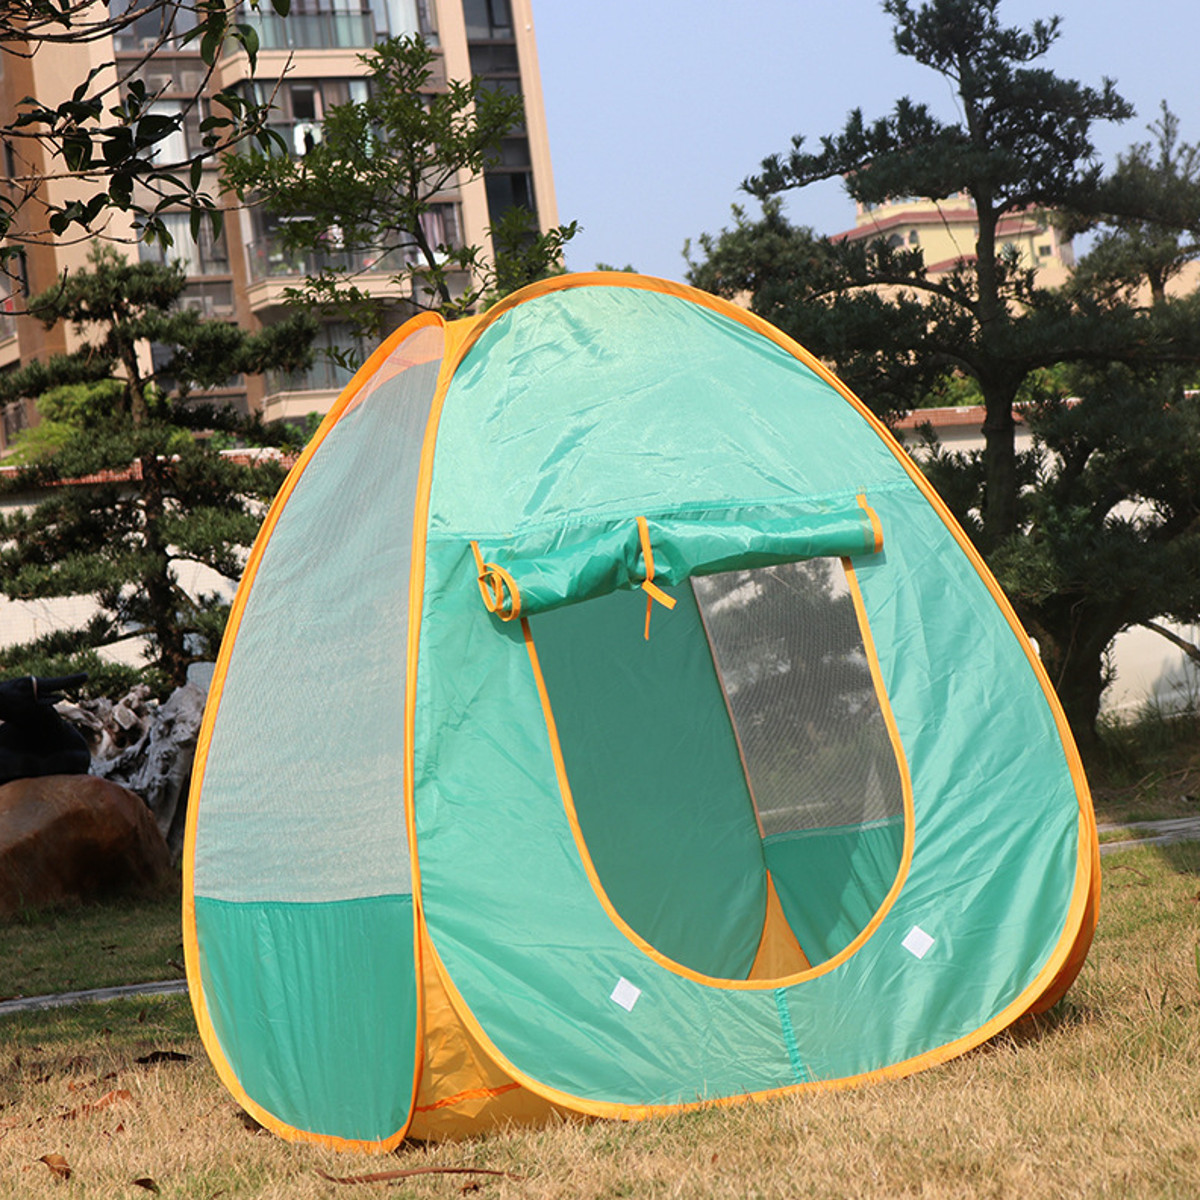 Kids Camping Tent Gear Set Play Tent with Pretend BBQ Toys Camping Tools for Toddlers Boys Girls for Indoor and Outdoor